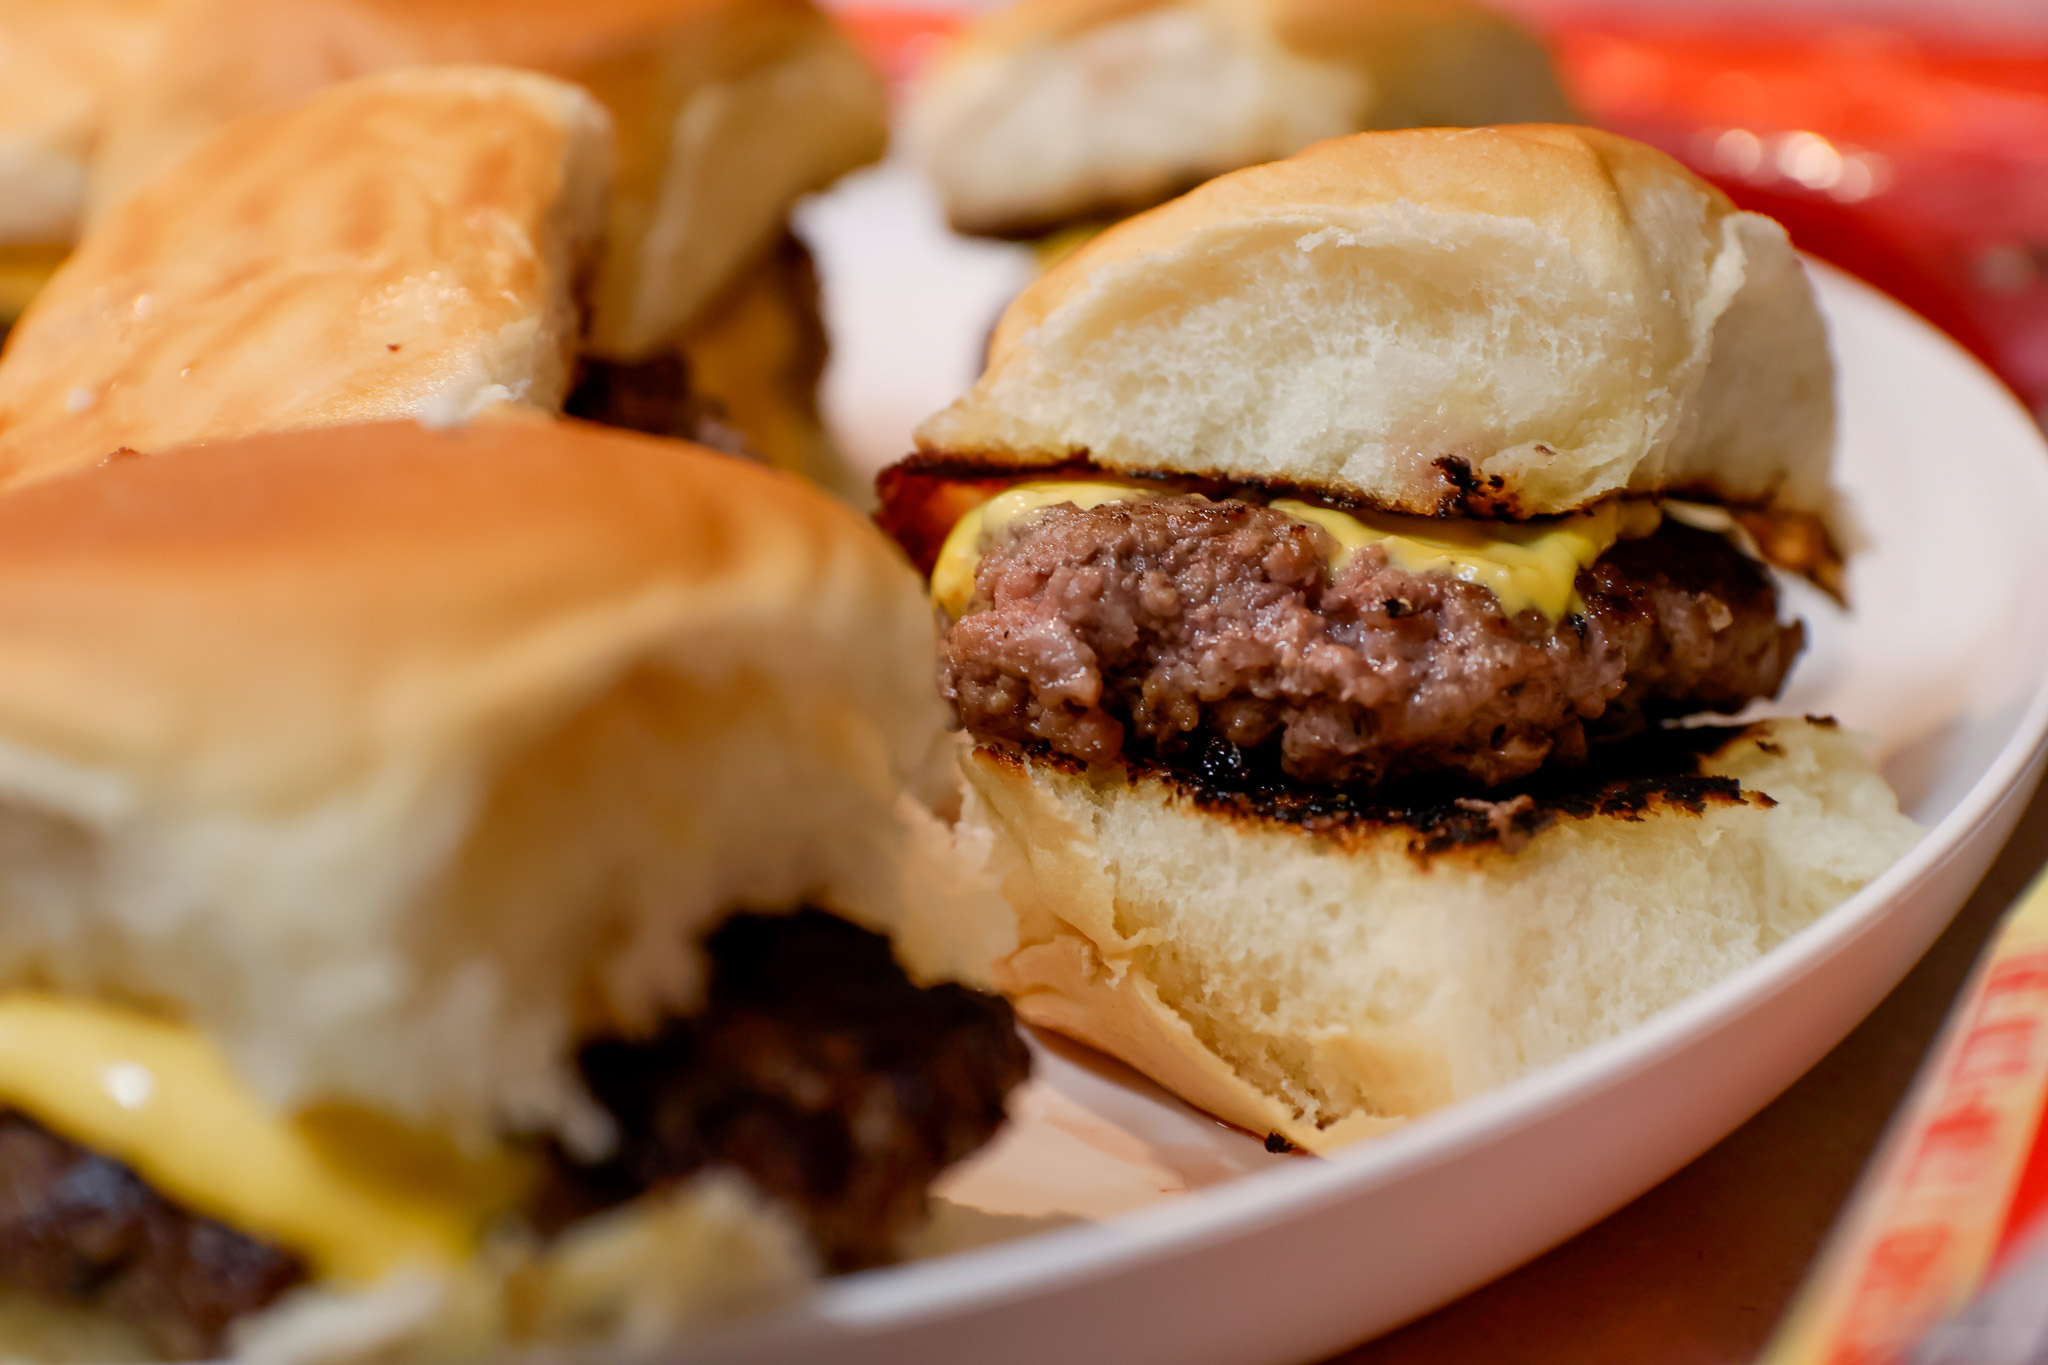 There's nothing better than a good slider.
Sal DiMaggio | The Montclarion